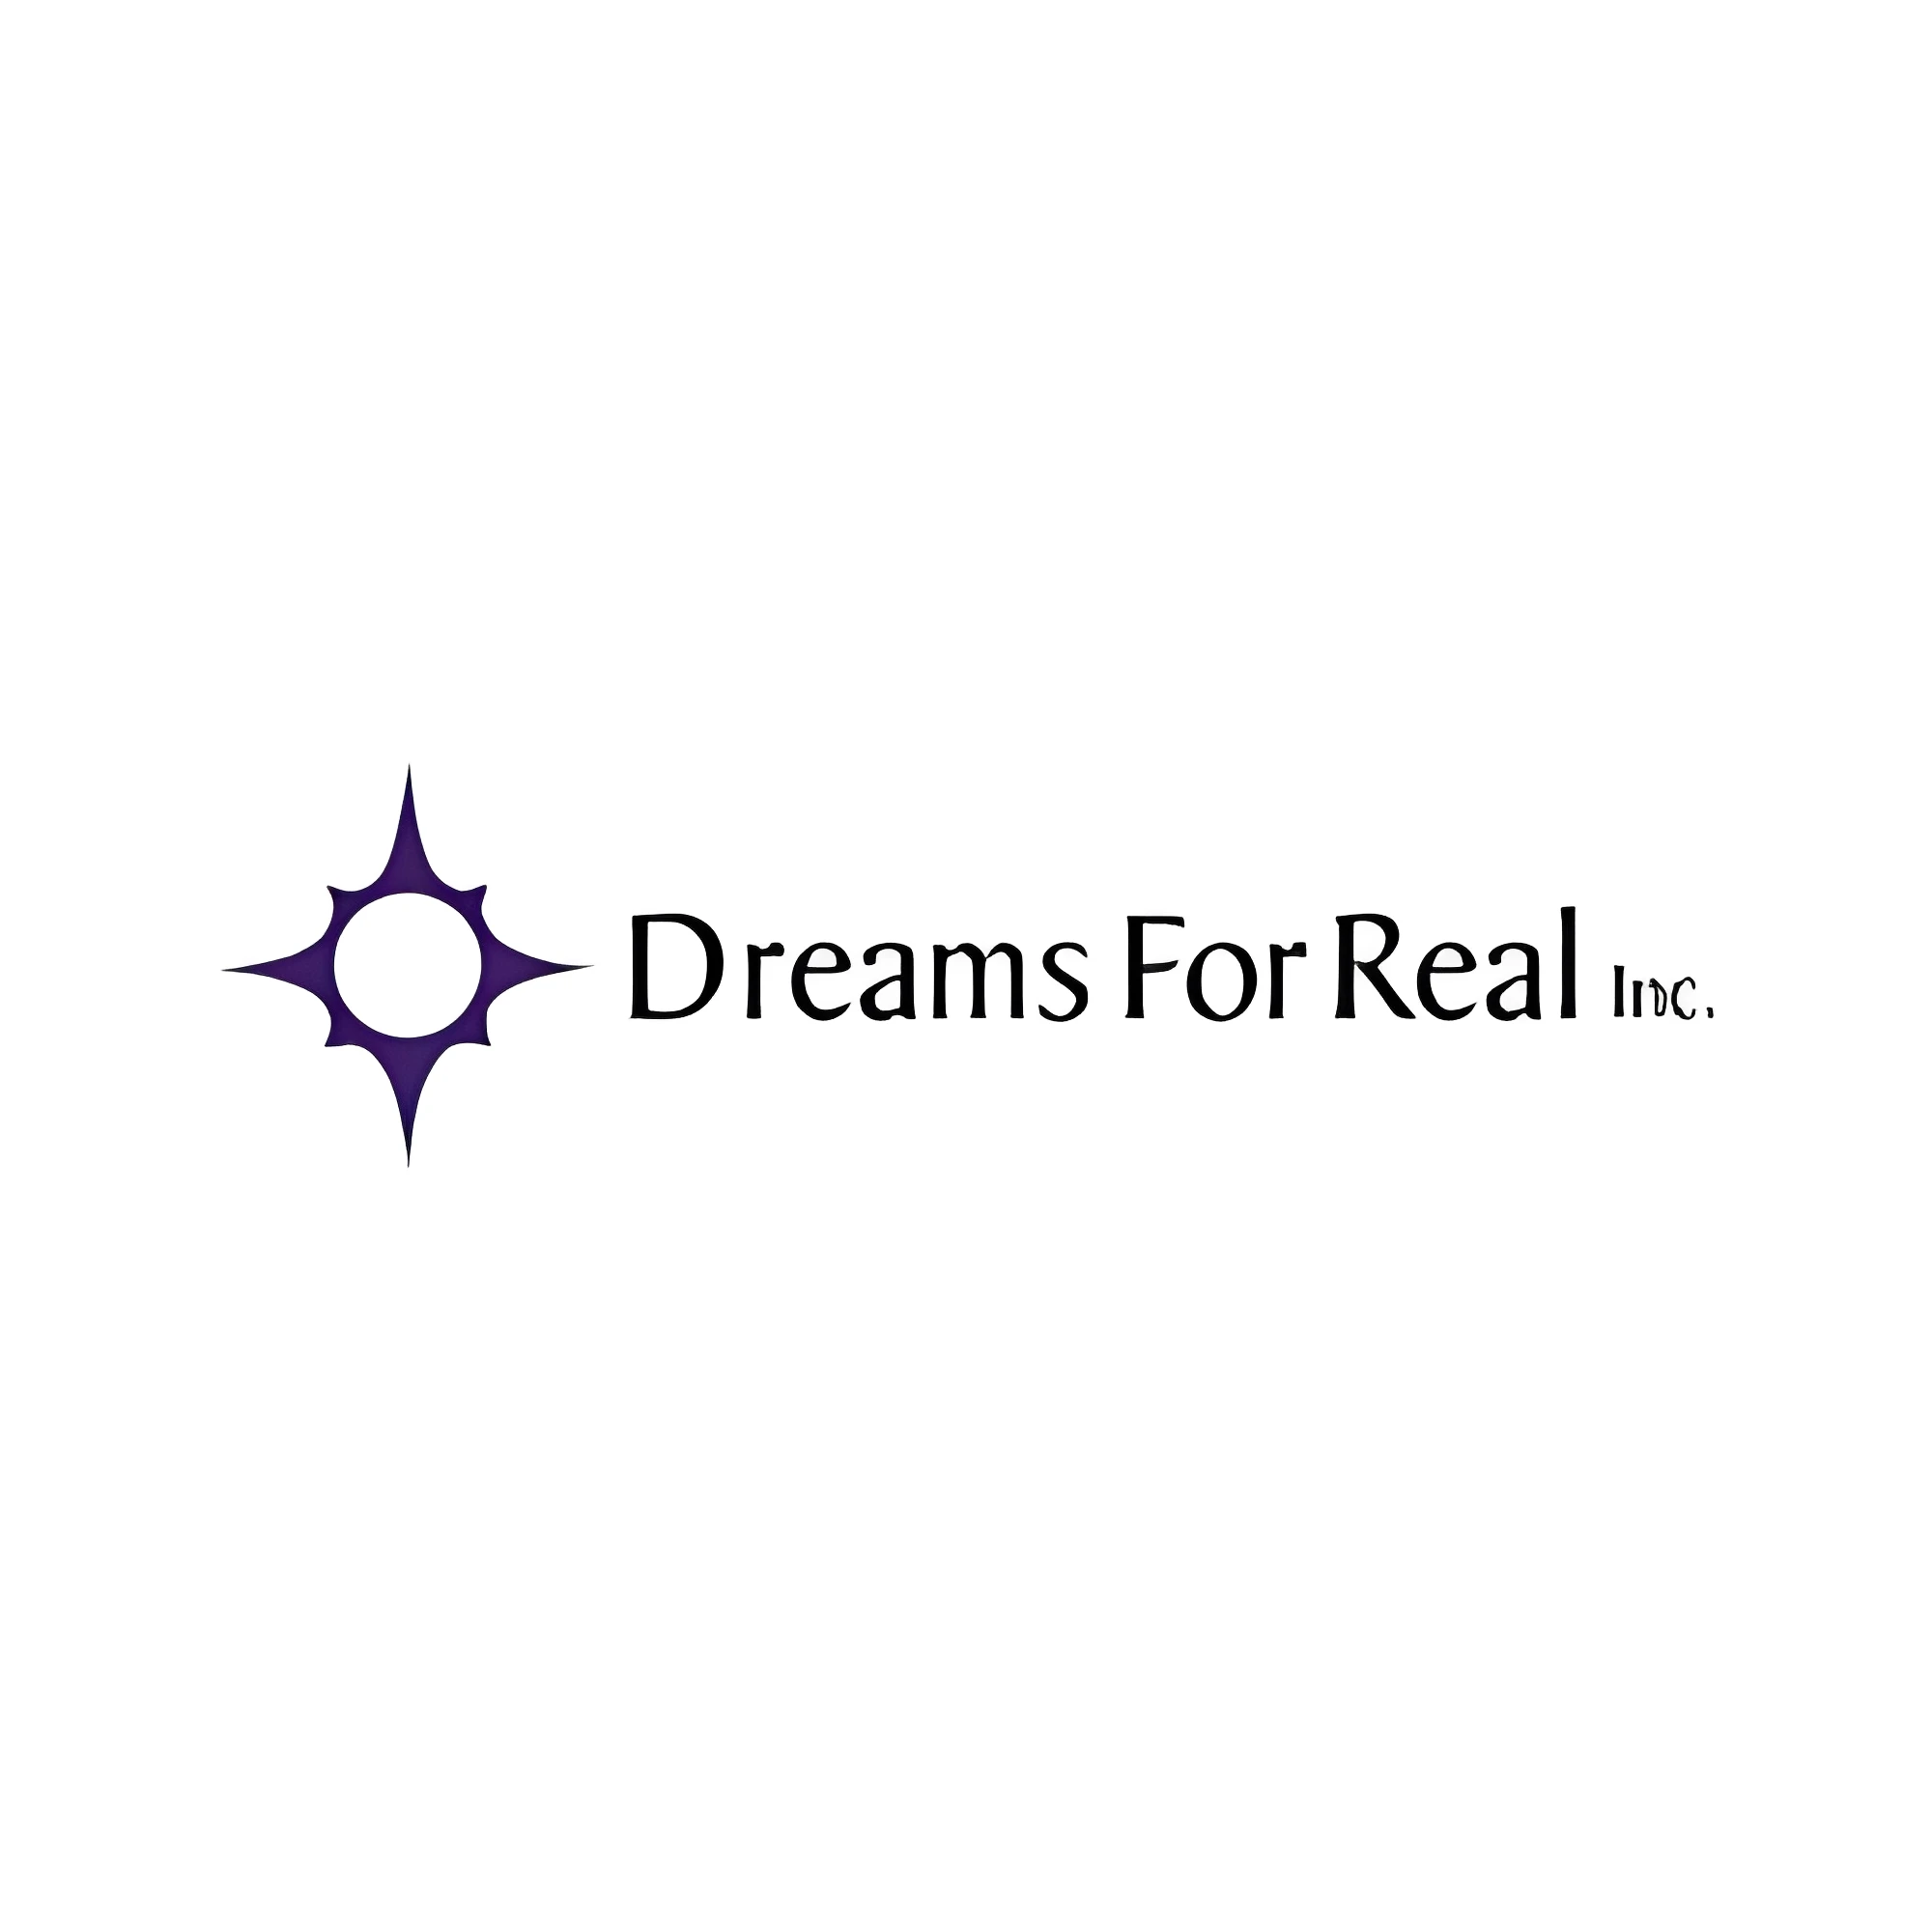 Dreams for Real